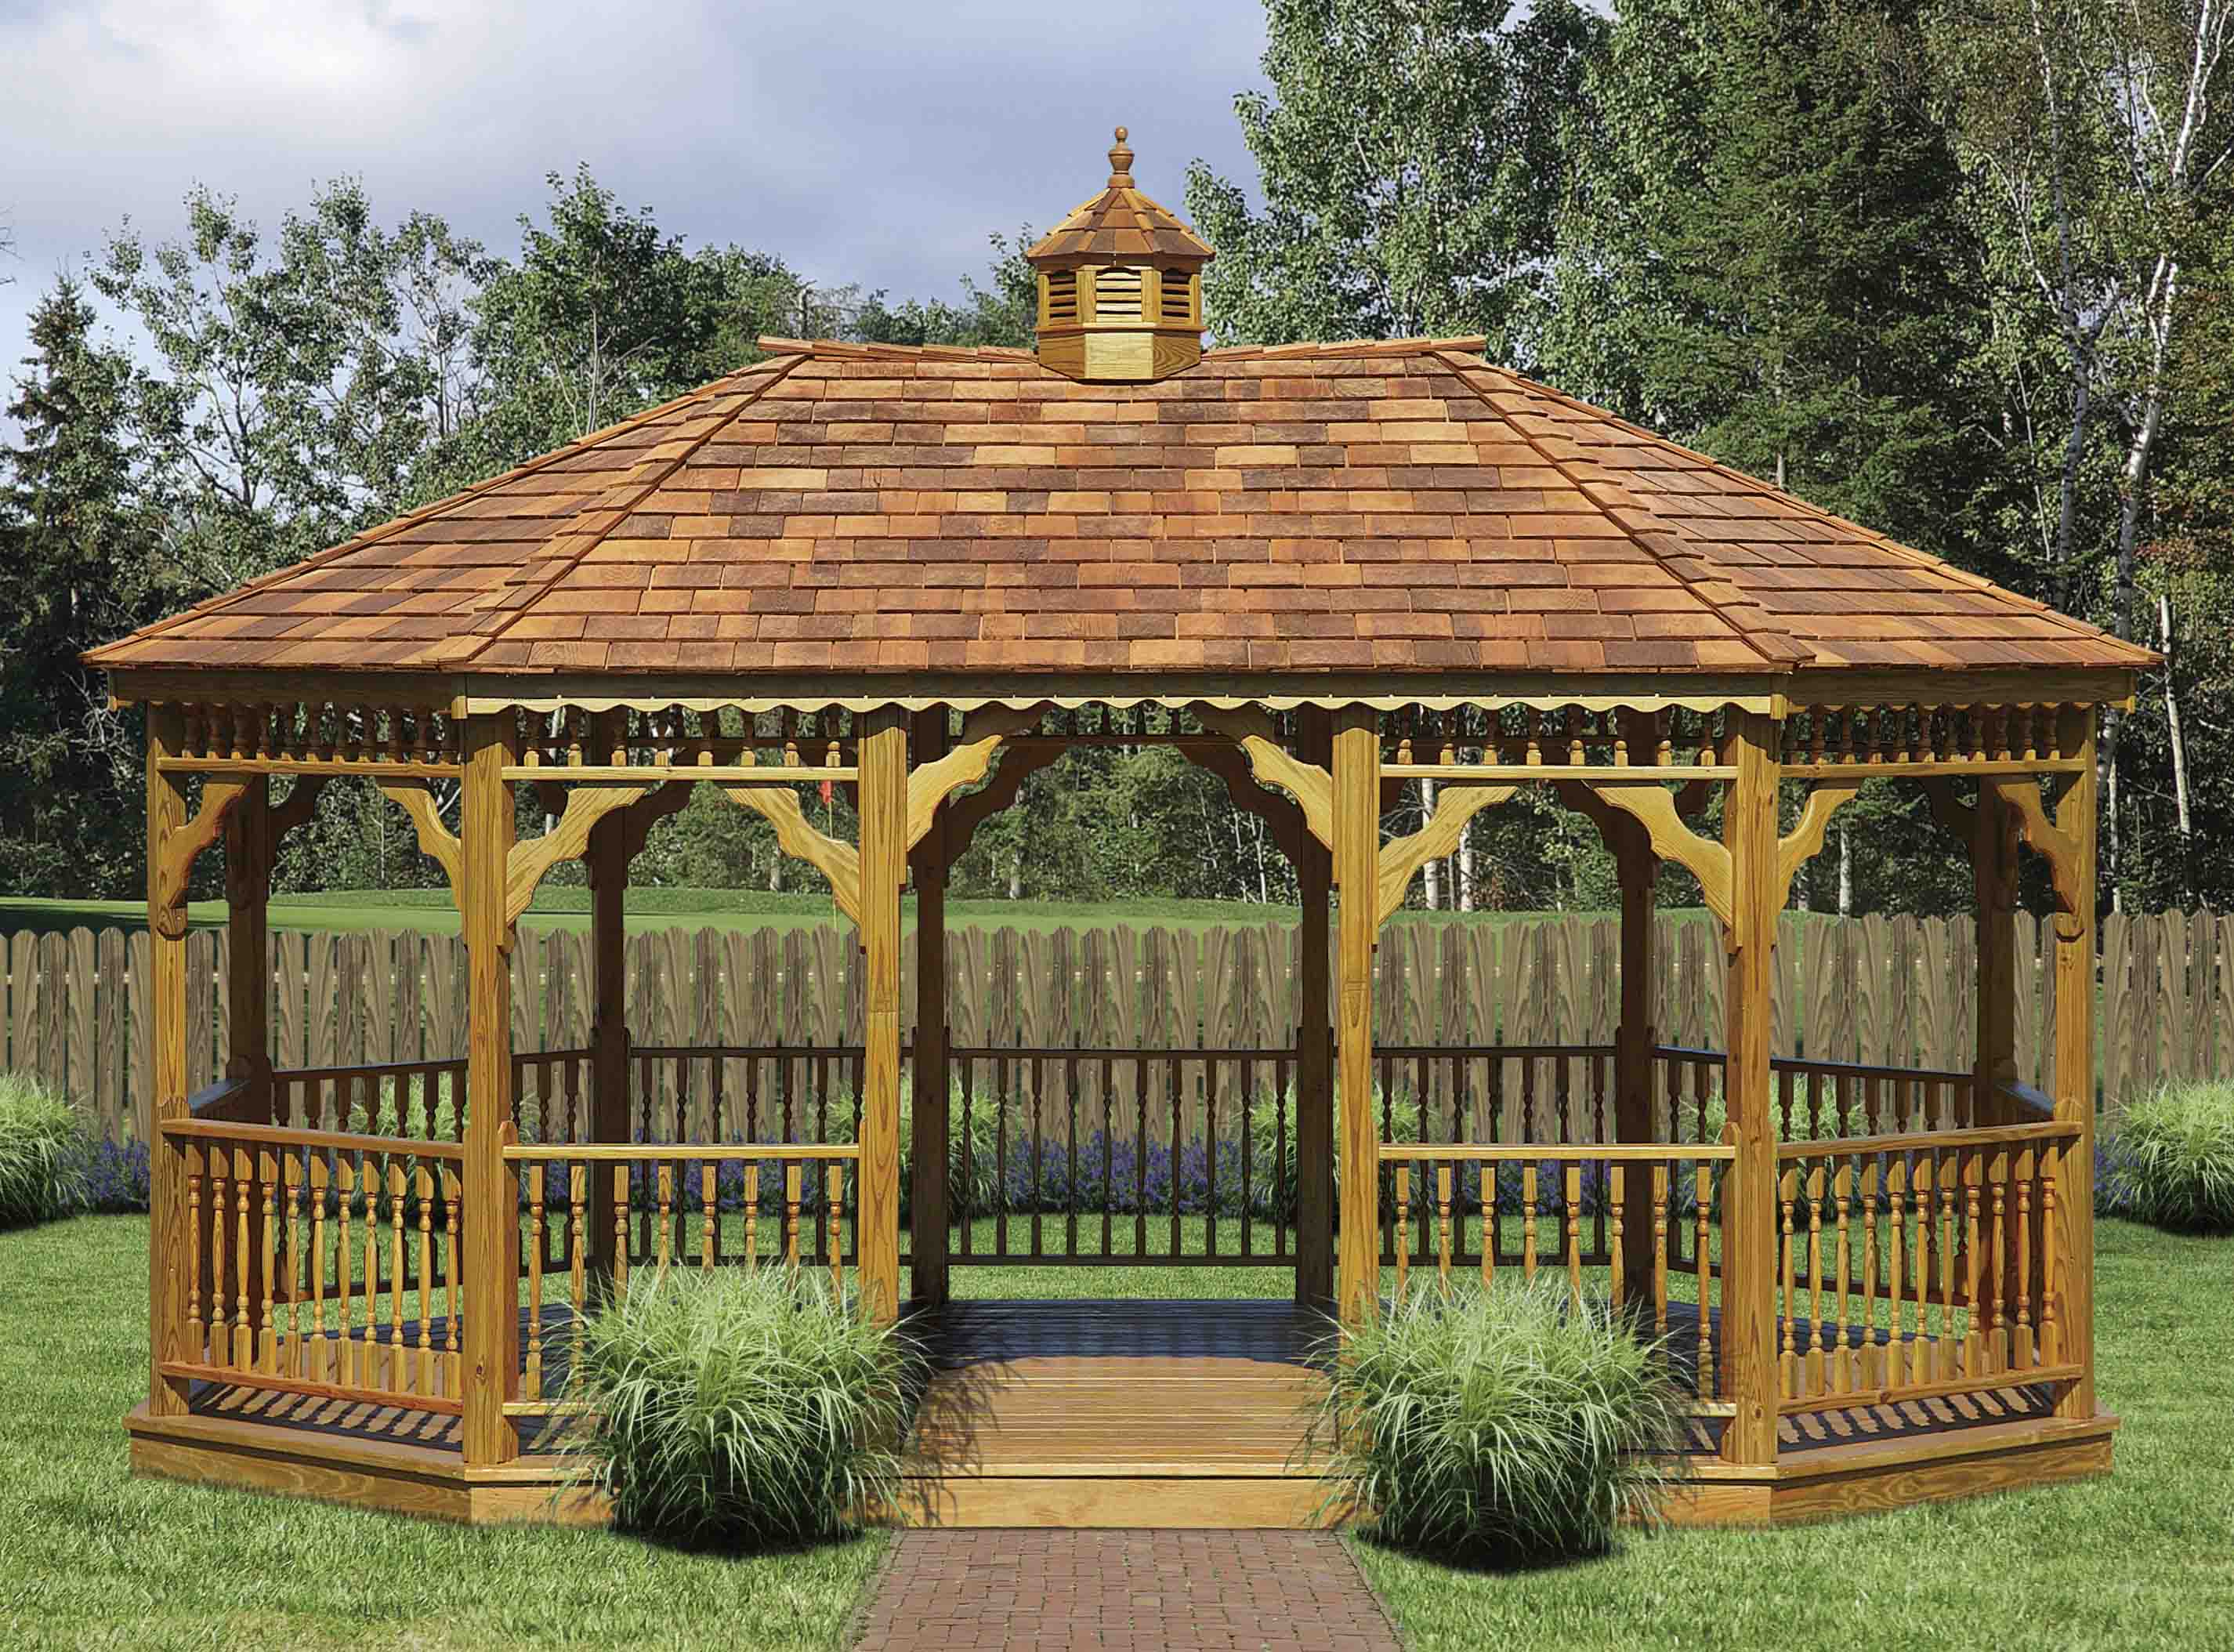 Oval Gazebos from Timber Mill